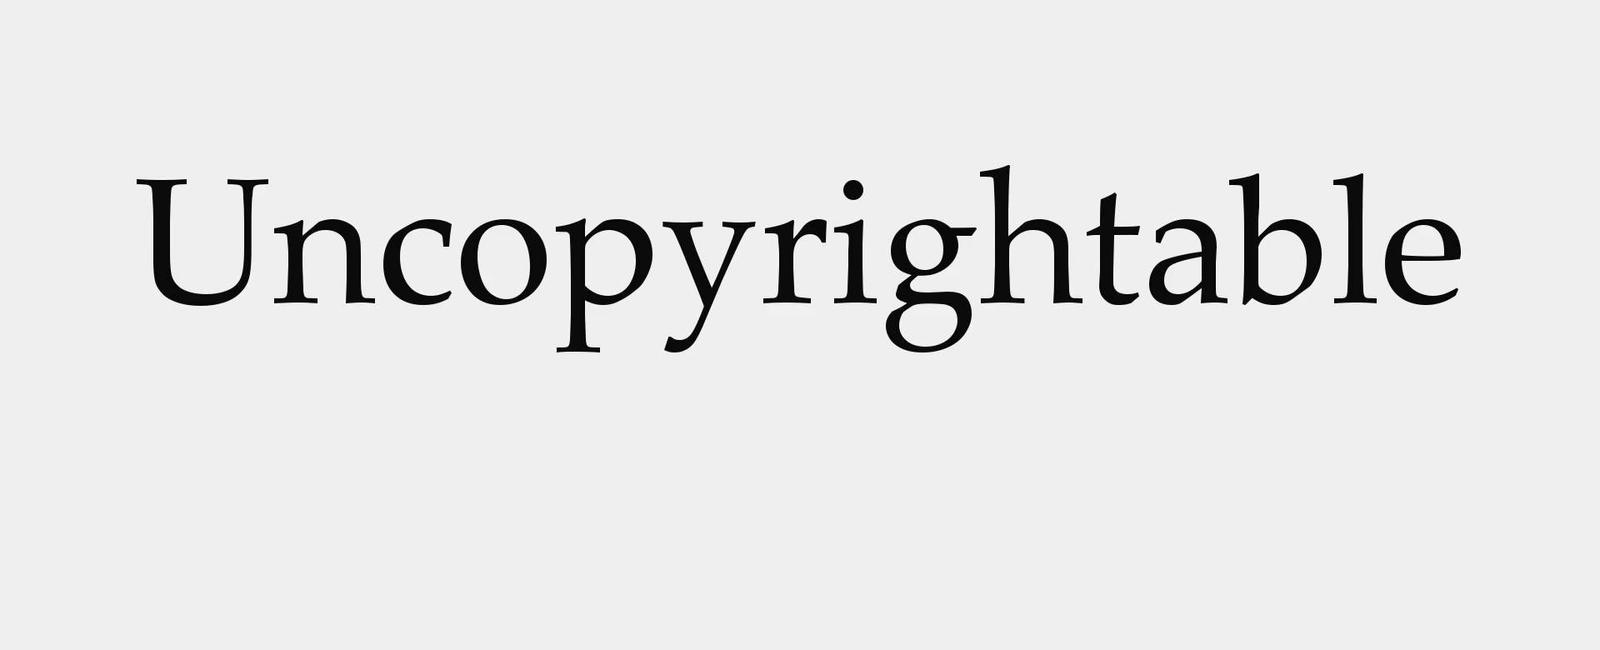 The word uncopyrightable is the only 15 letter word that can be spelled without repeating any letter